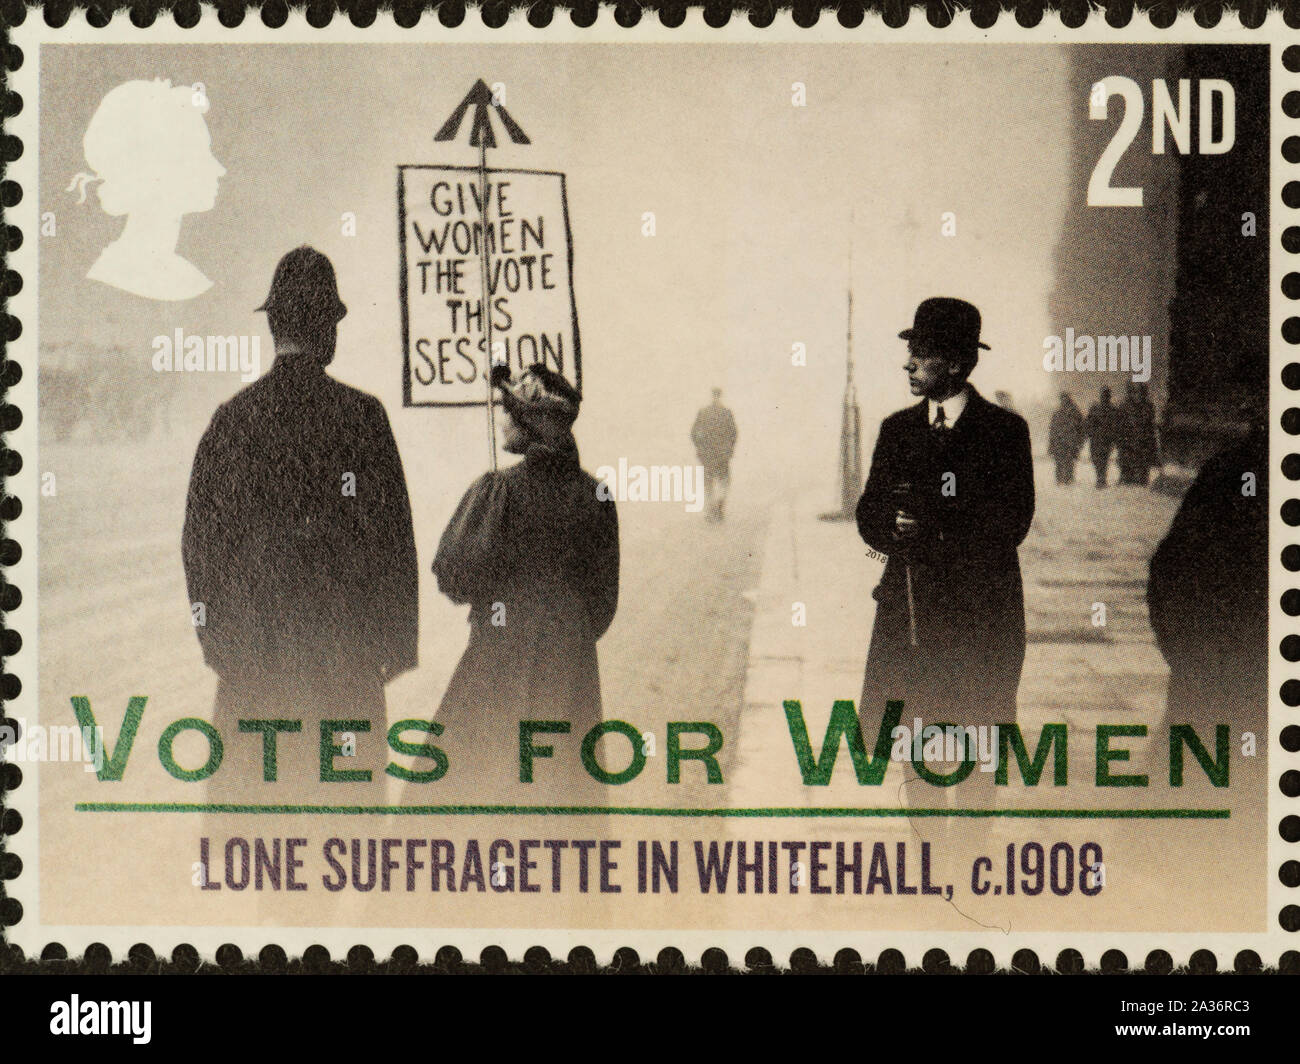 Votes for women stamp, published in February 15, 2018, by Royal Mail, UK. Private Collection. Its design is featured photograph of campaigning in the decade before the right to vote passing 1918 Representation of the People Act. Lone suffragette in Whitehall, c1908. Stock Photo